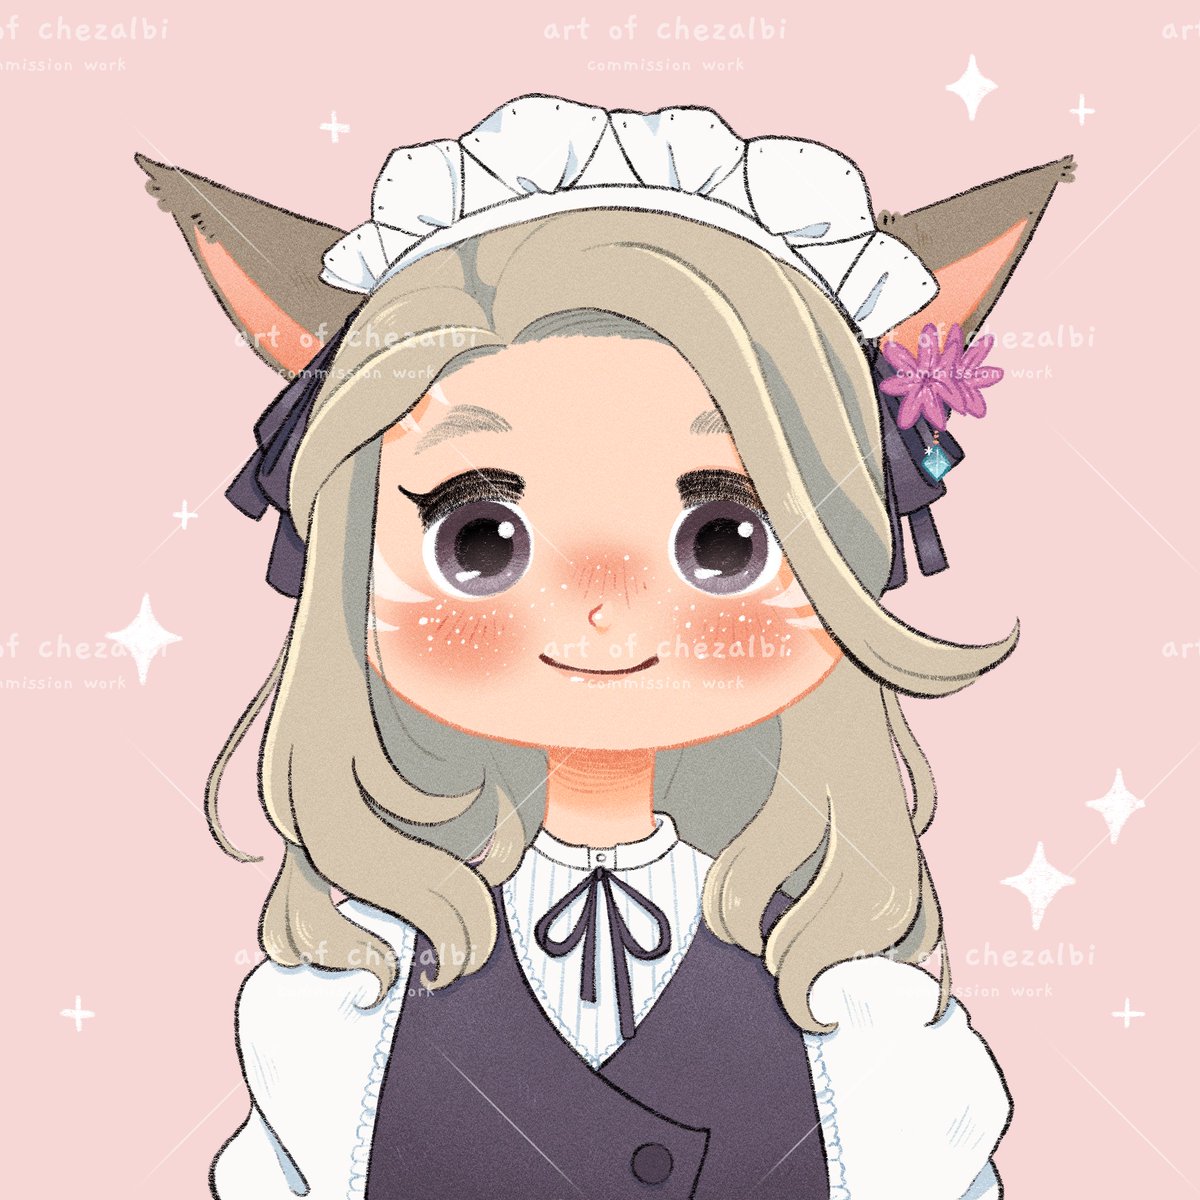 「FFXIV cmmissions I've done lately! 」|chezalbiのイラスト